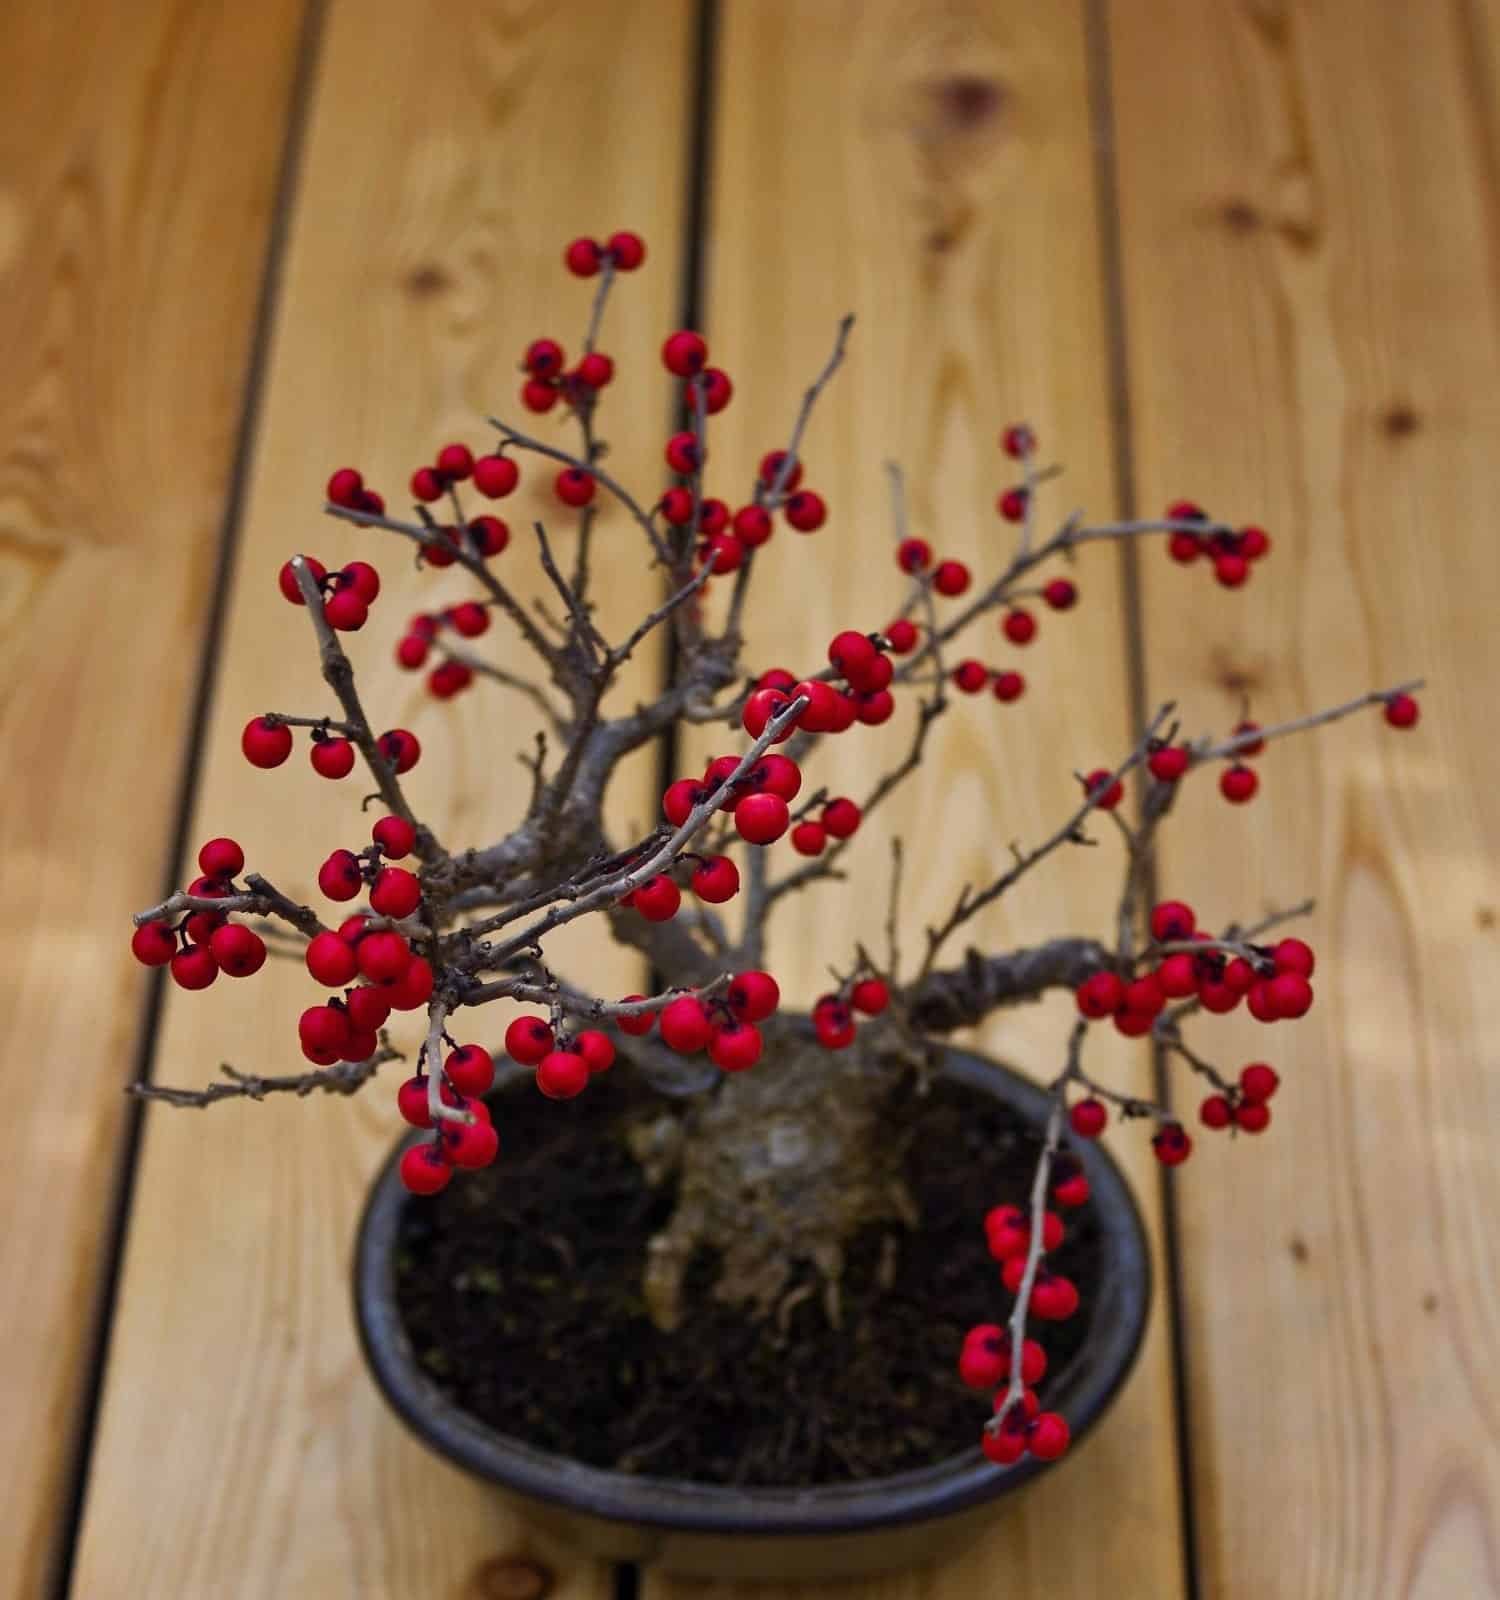 Bonsai Holly berries tree. Red berries of holly bonsai tree. Photo of beautiful autumn bonsai holly tree with red berries without leaves. Little plant with red ripe fruits in pot. Japanese garden